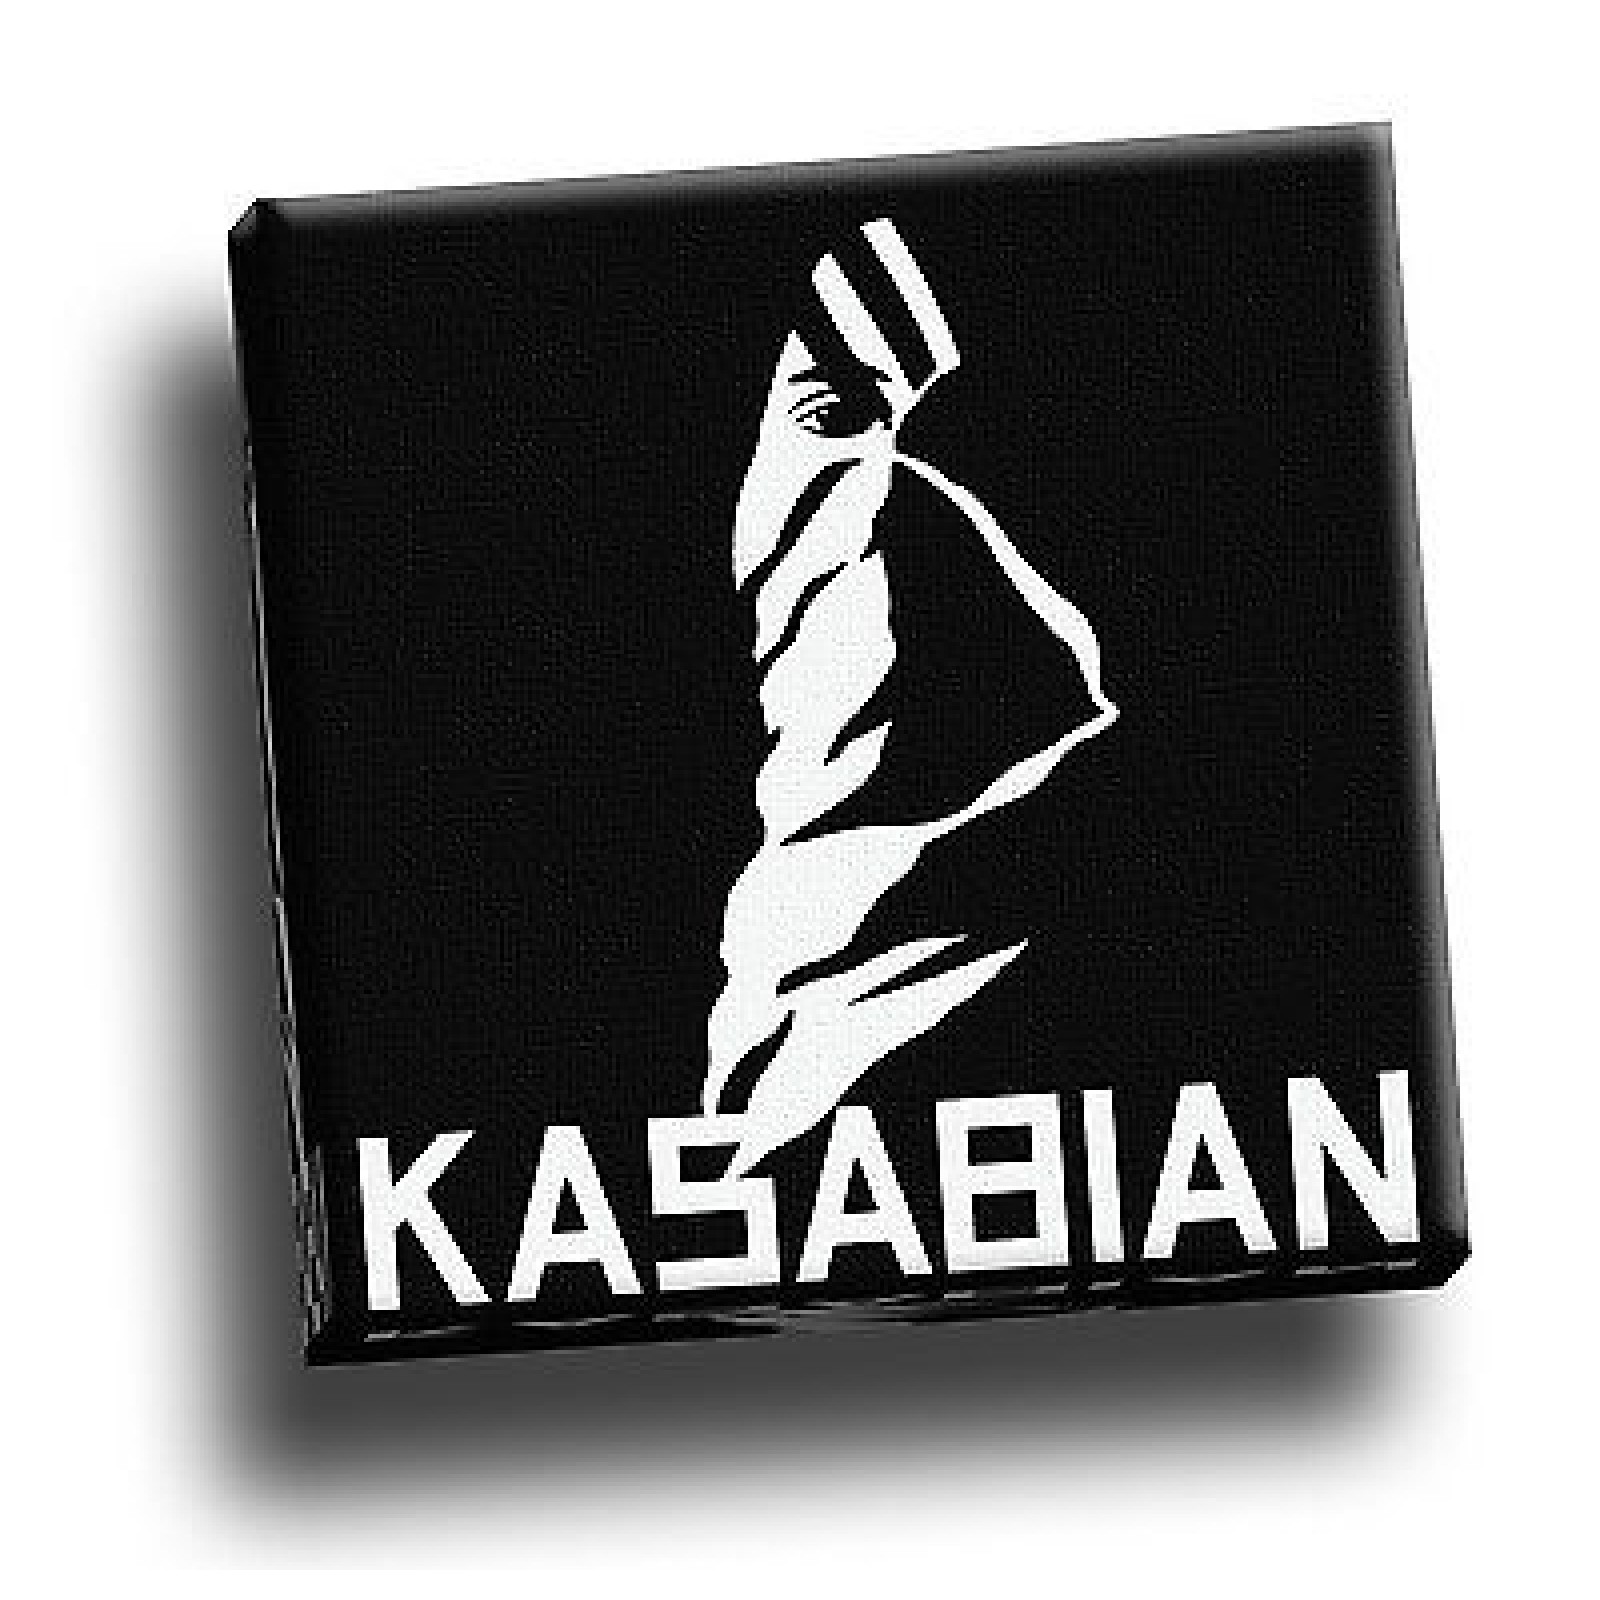 Empire Giclee Canvas Album Cover Picture Art Kasabian 